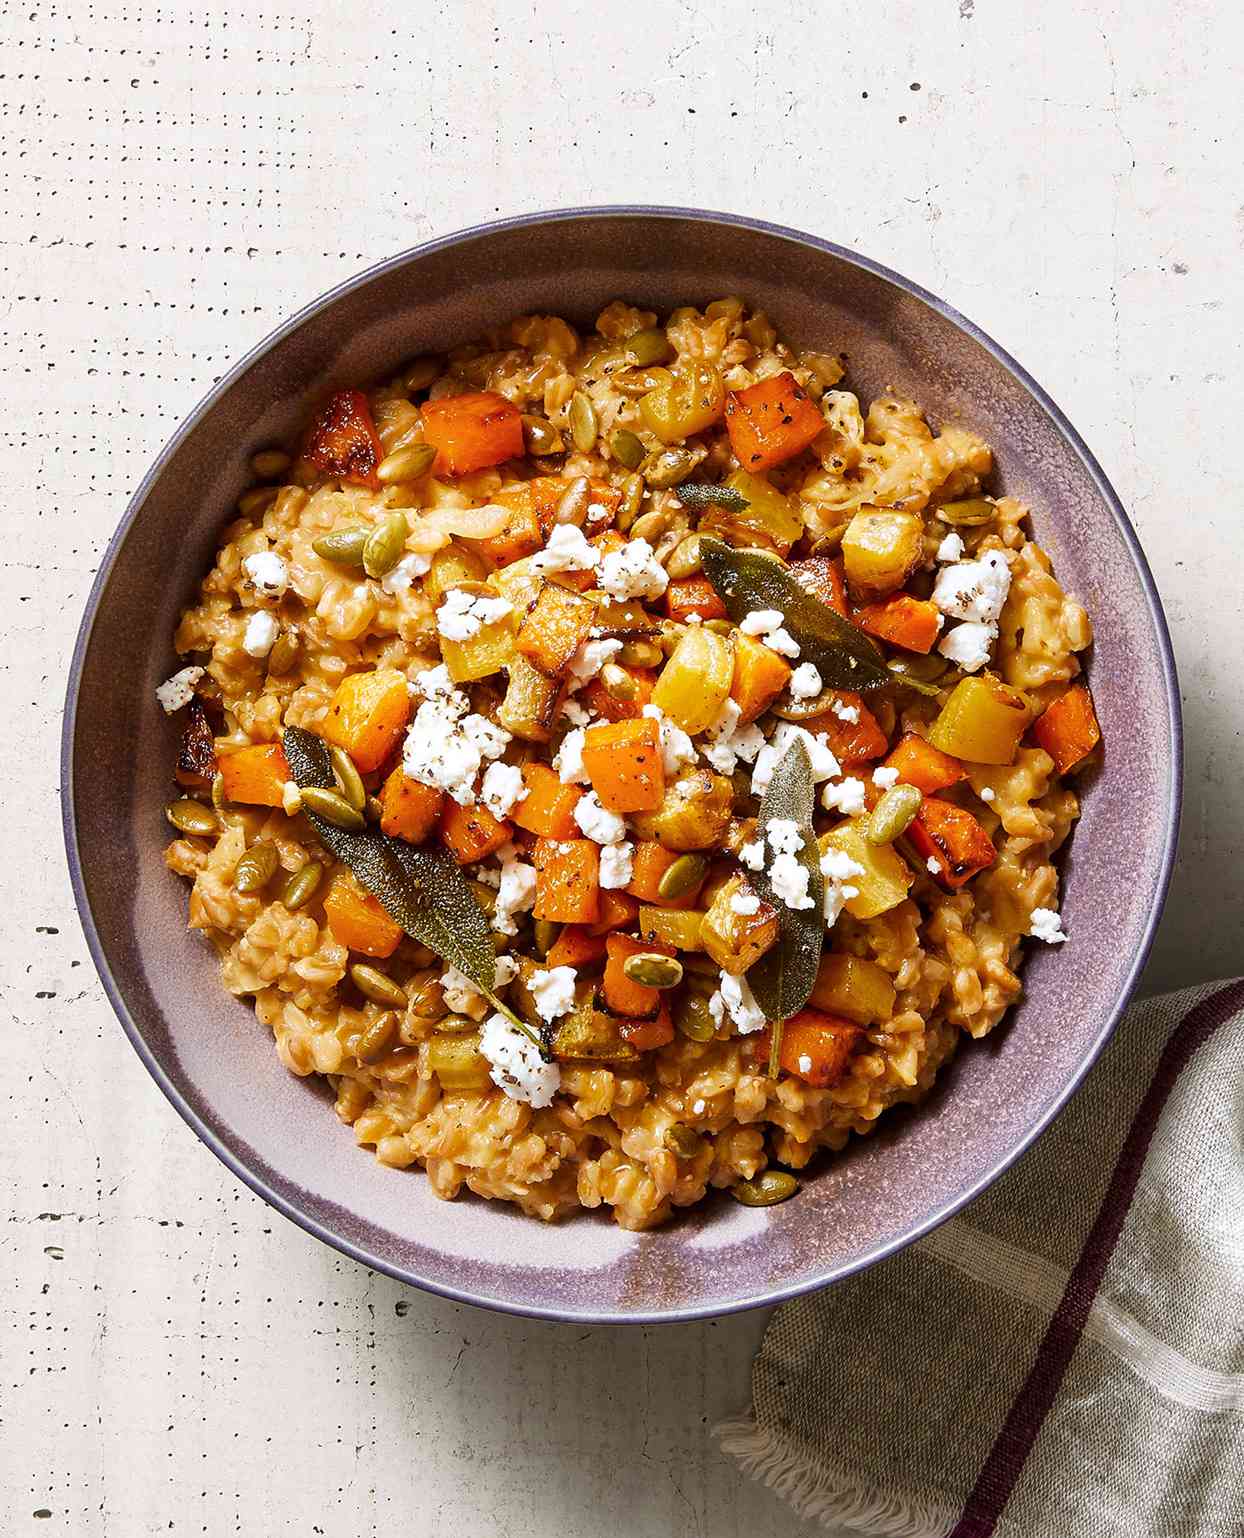 baked farro risotto with golden vegetables and goat cheese